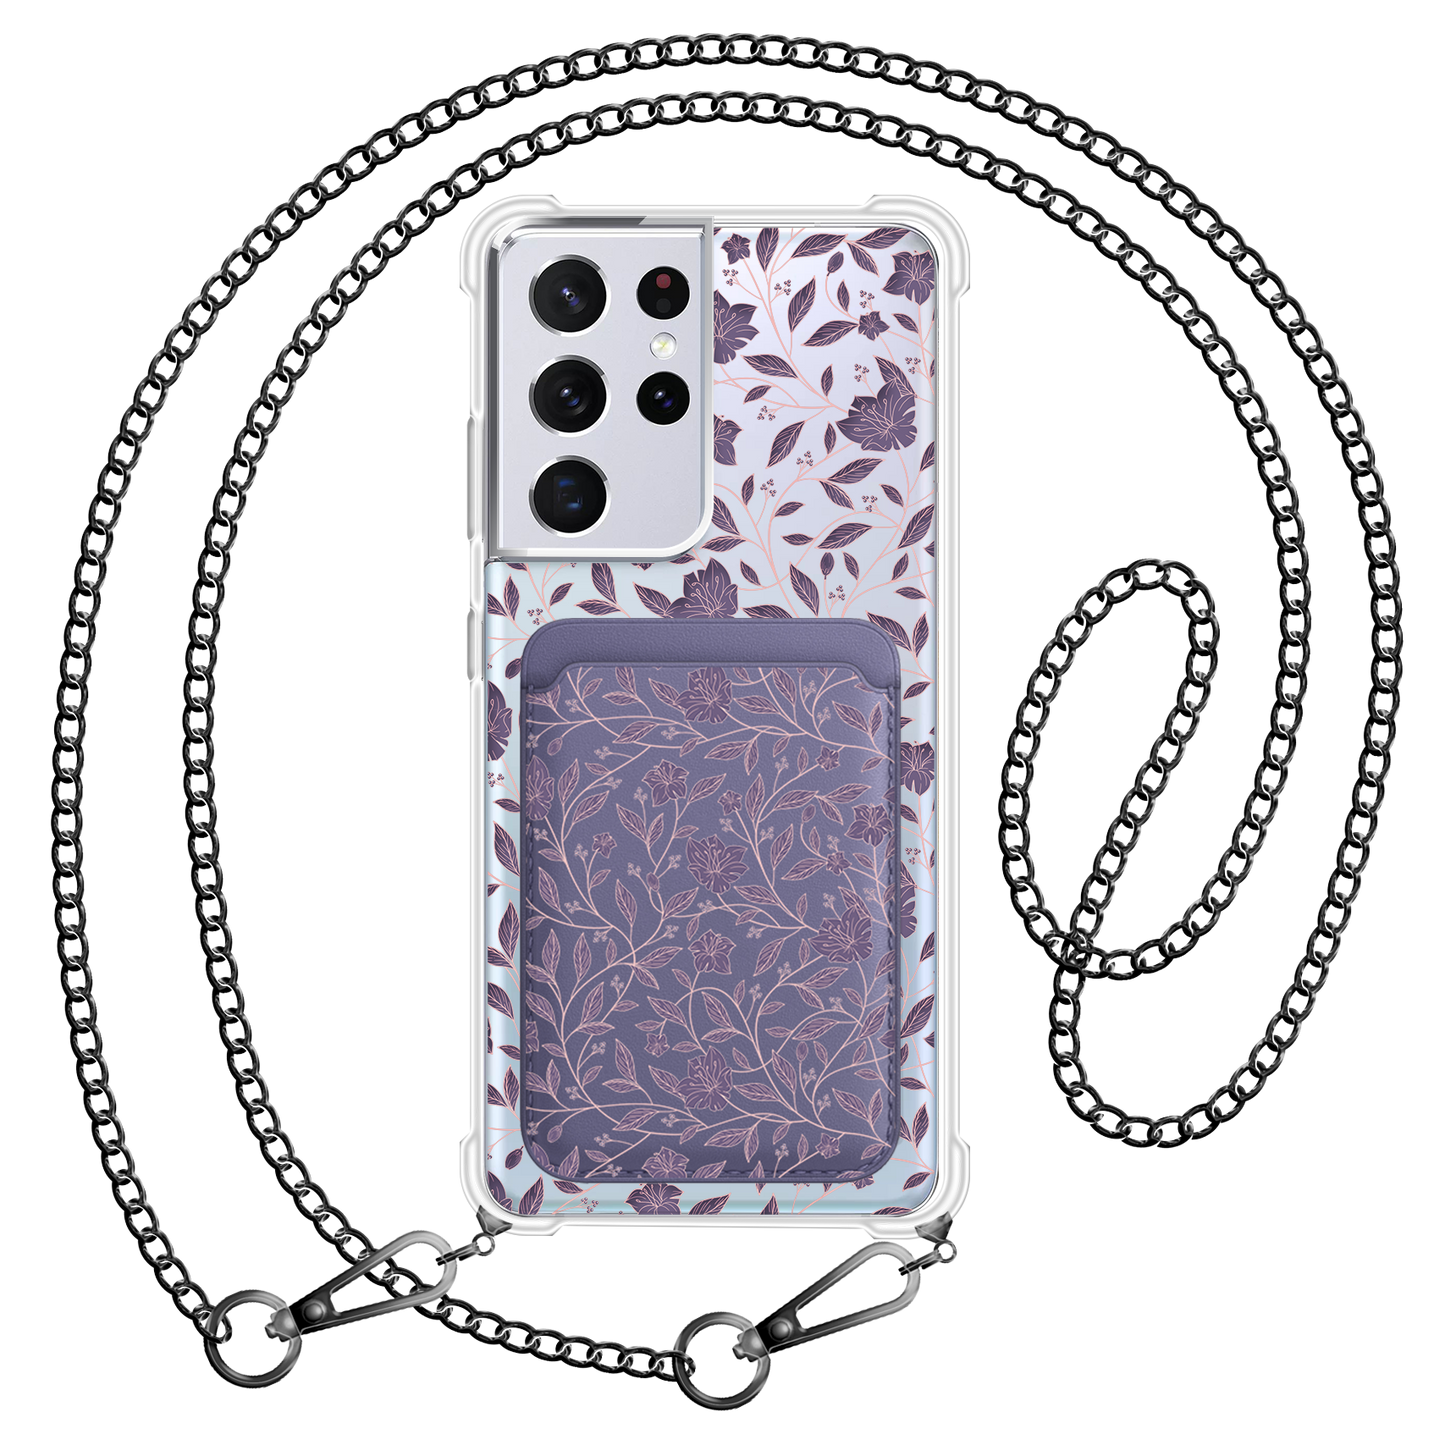 Android Magnetic Wallet Case - Sketchy Flower 4.0